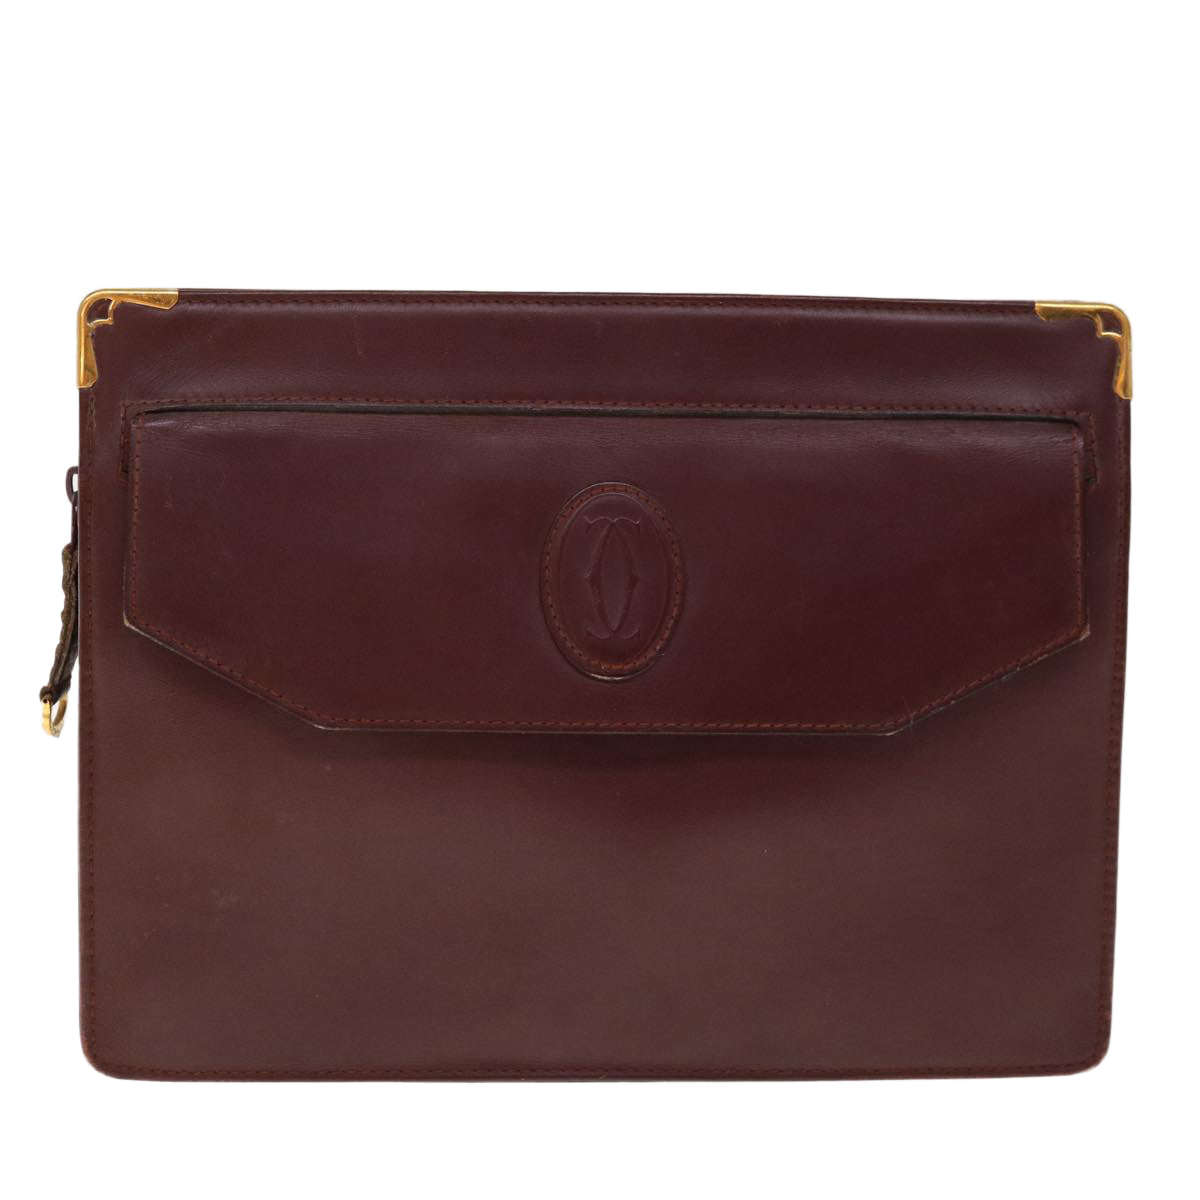 CARTIER Clutch Bag Leather Wine Red Auth 63905